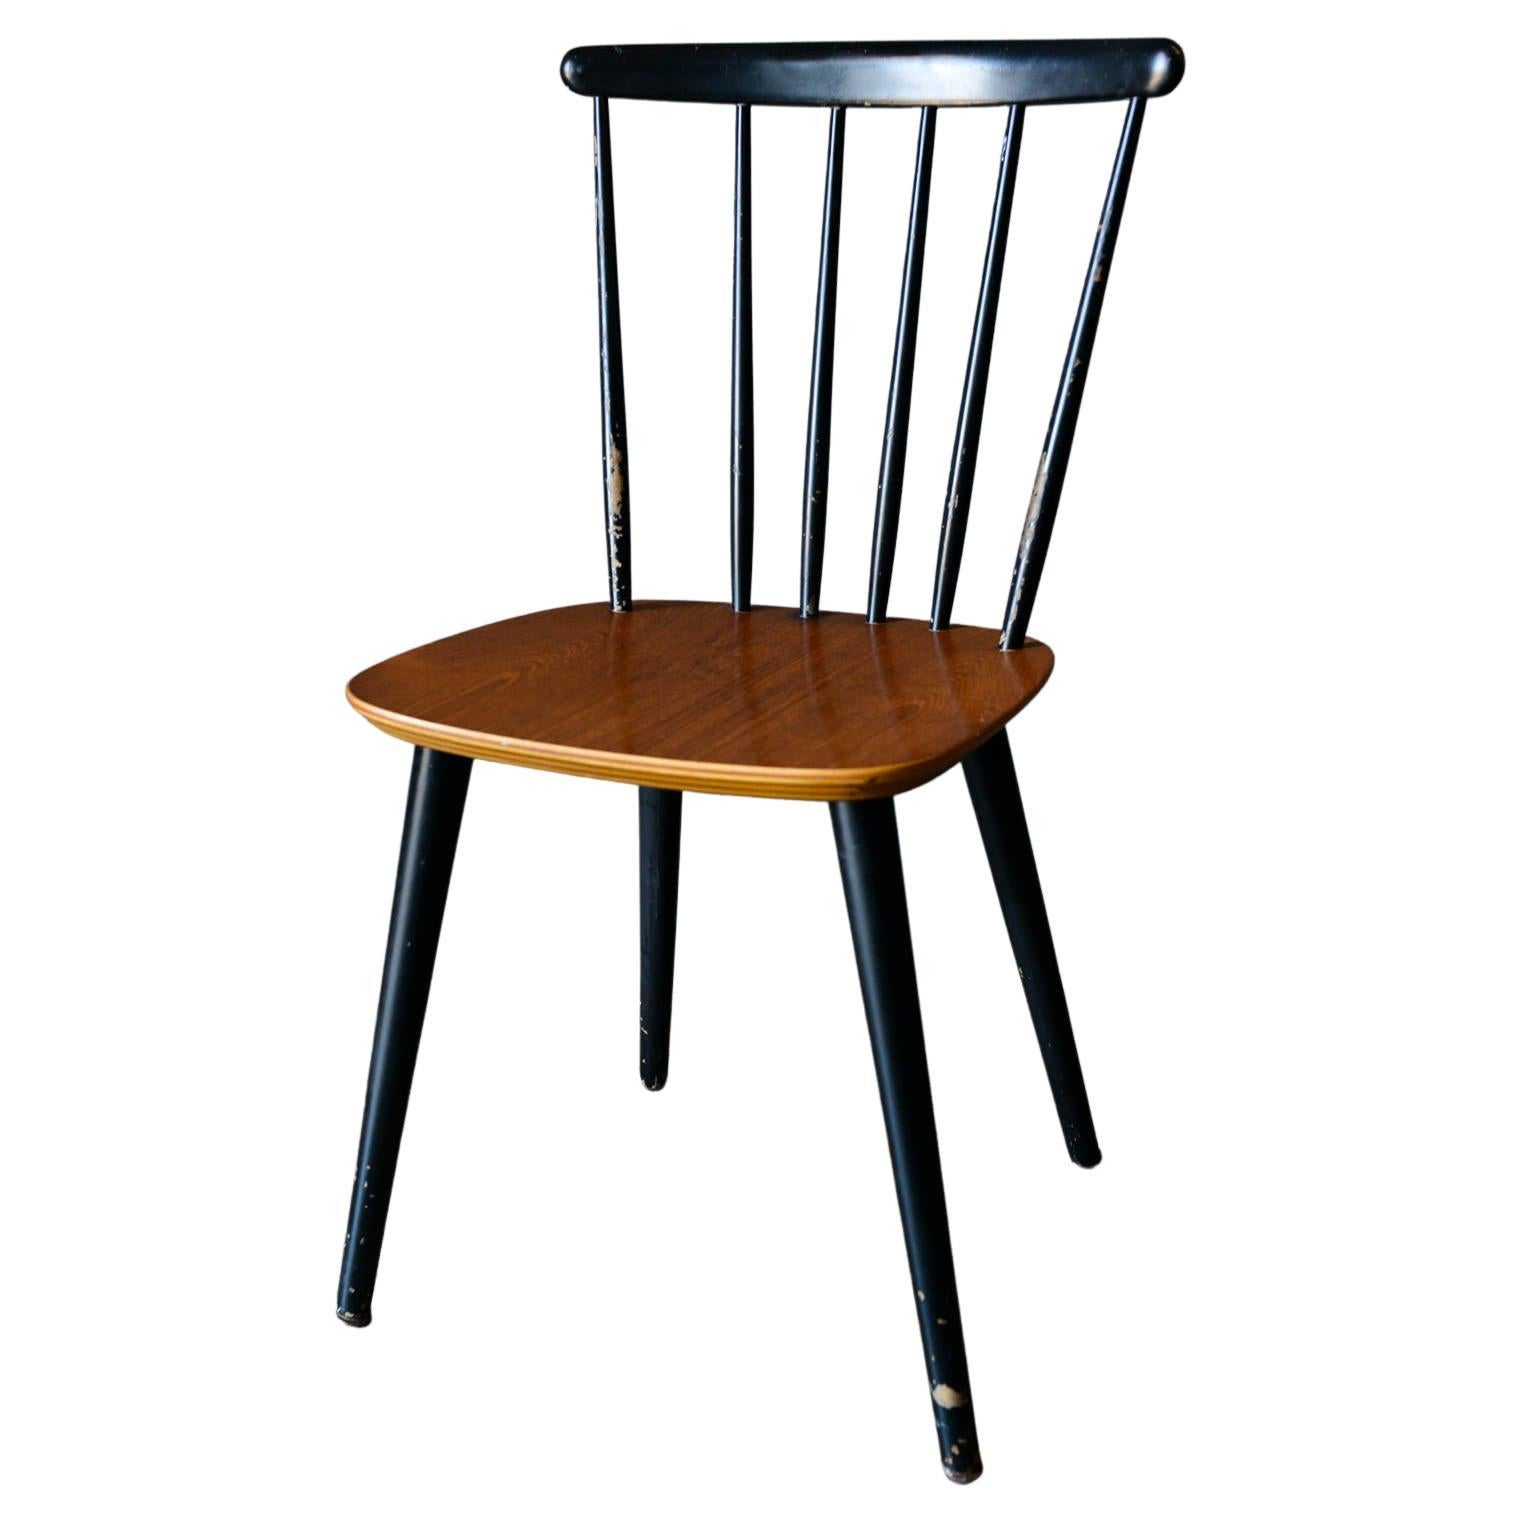 Danish Spindle Back Chair by Thomas Harlev for Farstrup, 1960 For Sale